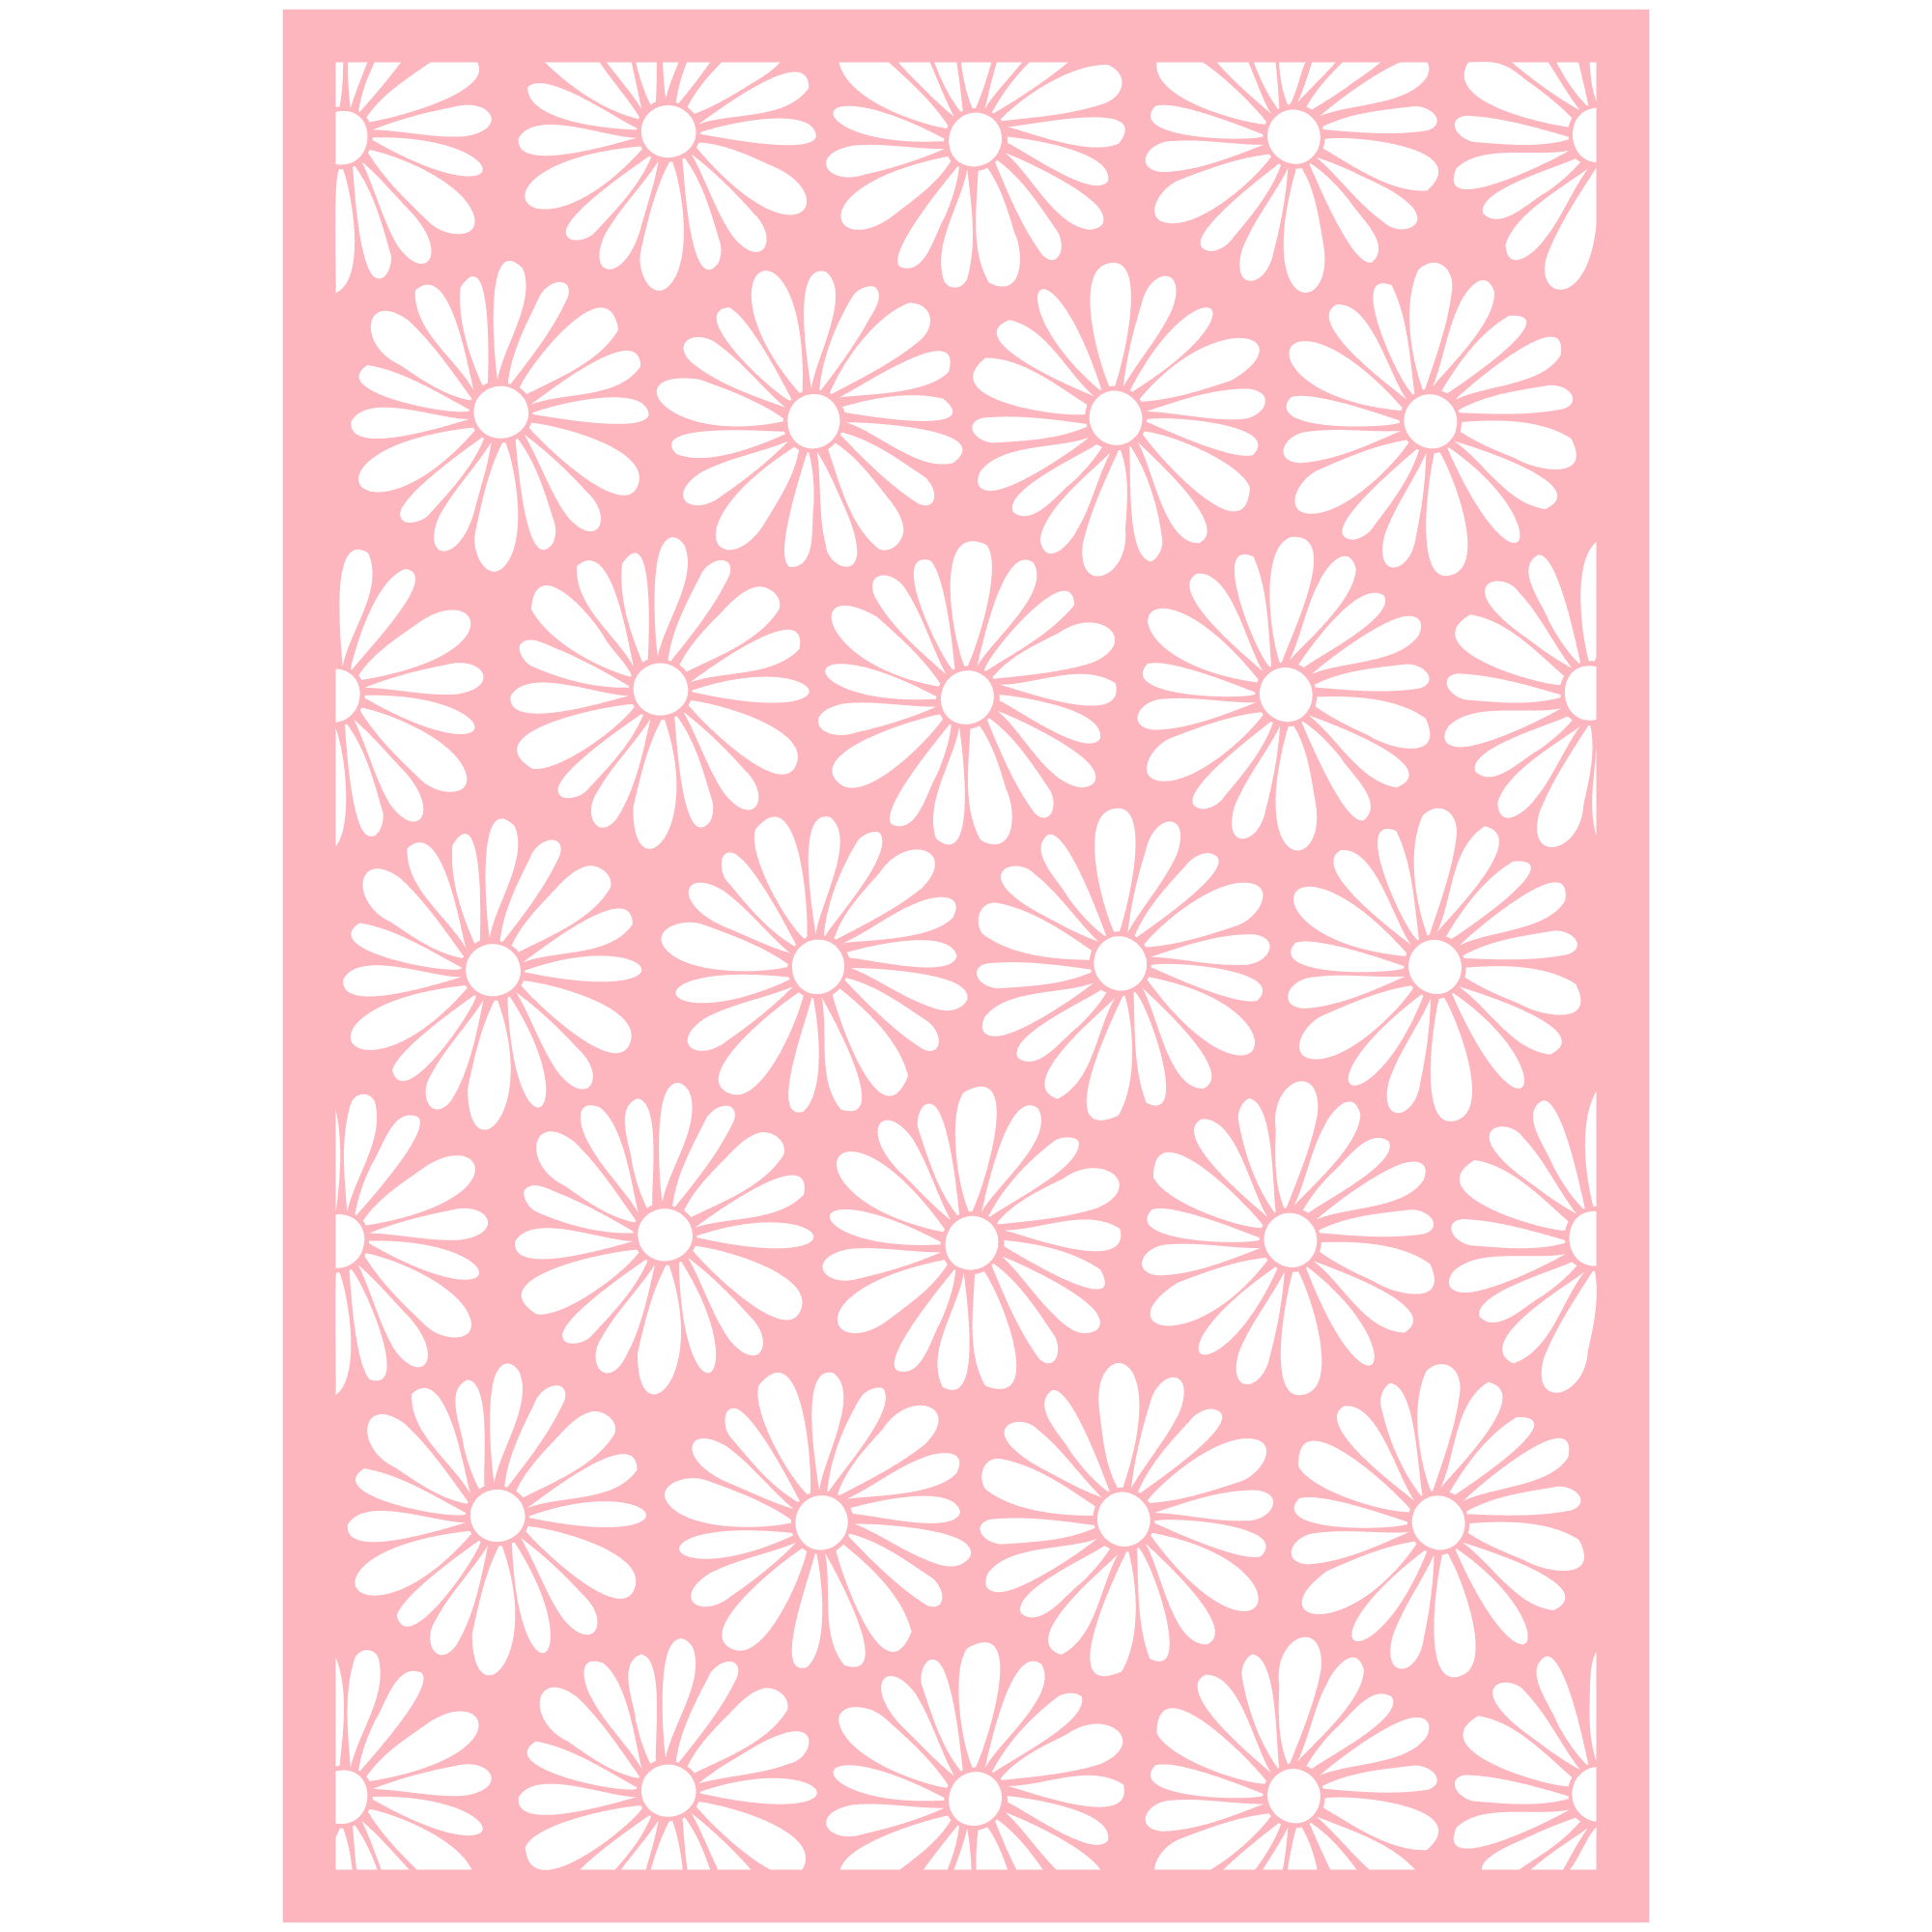 Doodle Daisy Flowers Card Base / Background / Stencil by Clikchic Designs